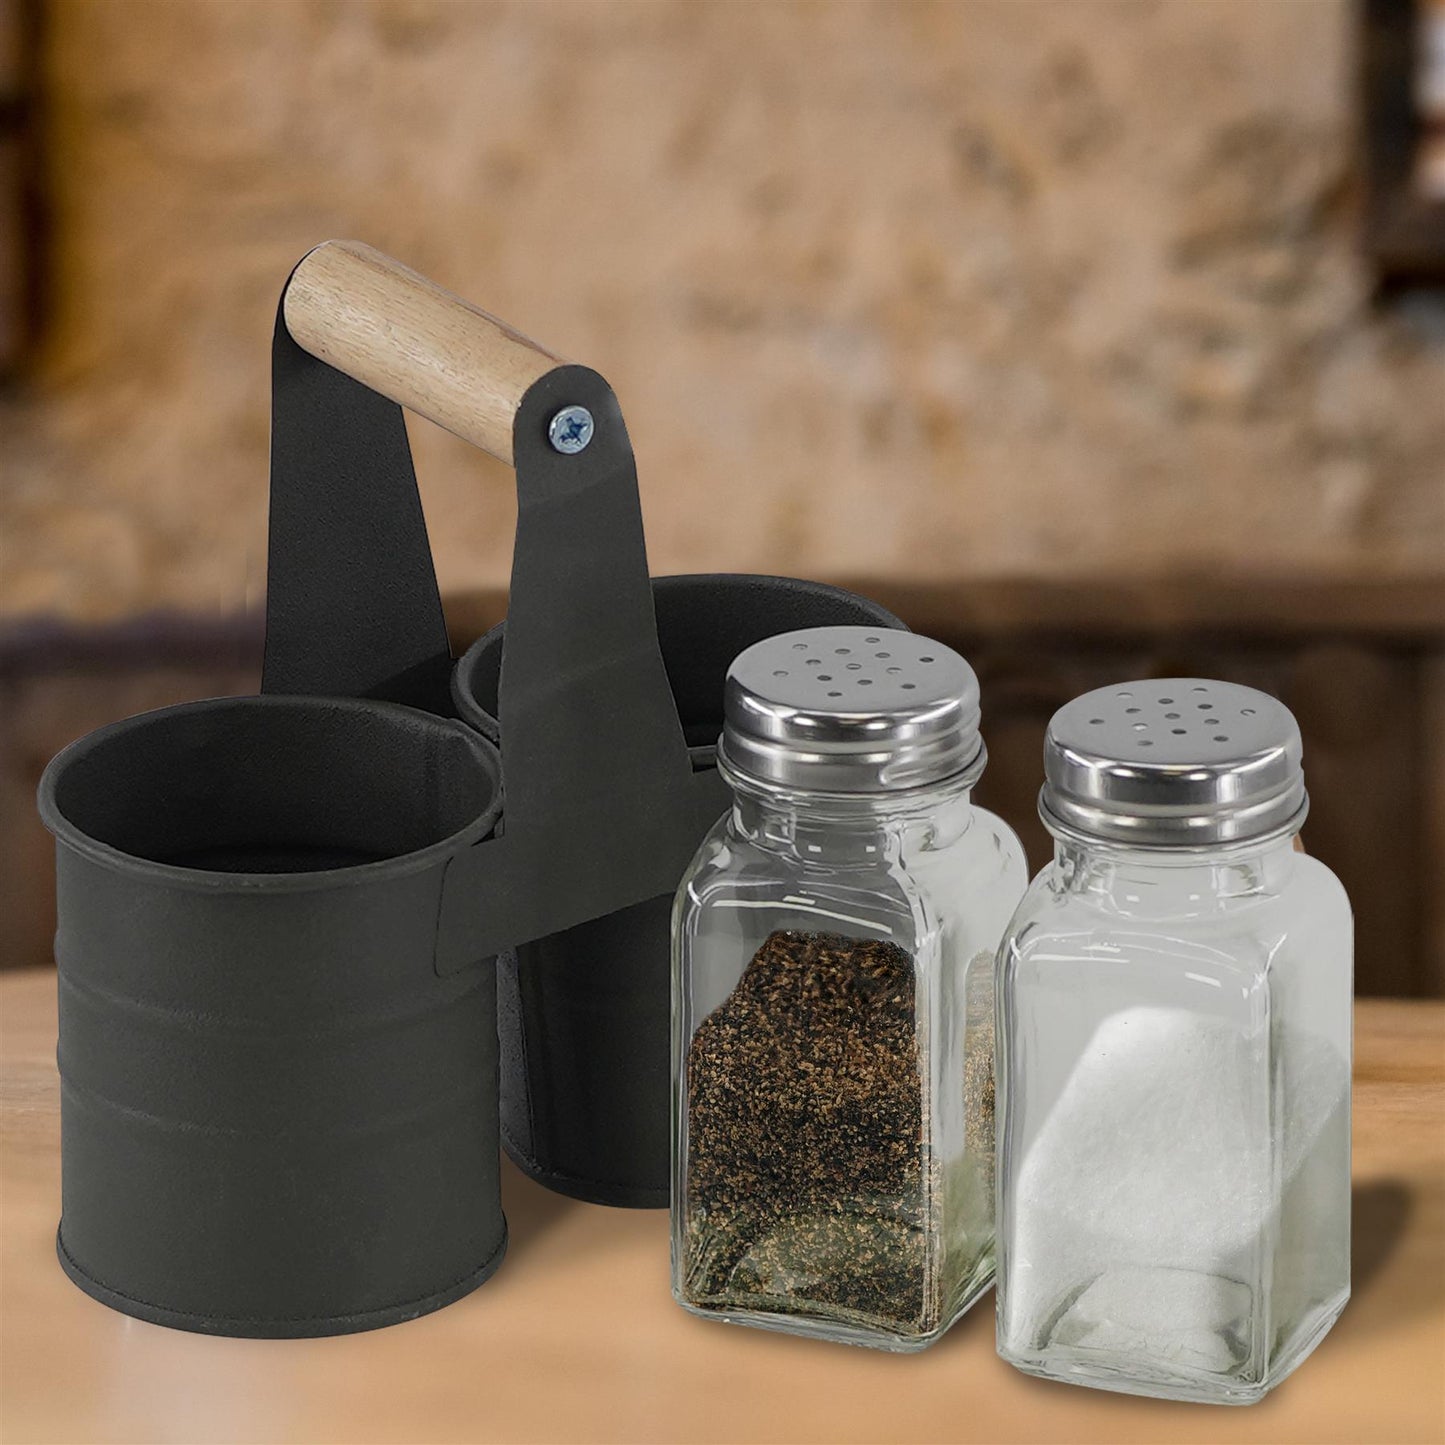 Salt And Pepper Shaker Set by GEEZY - UKBuyZone